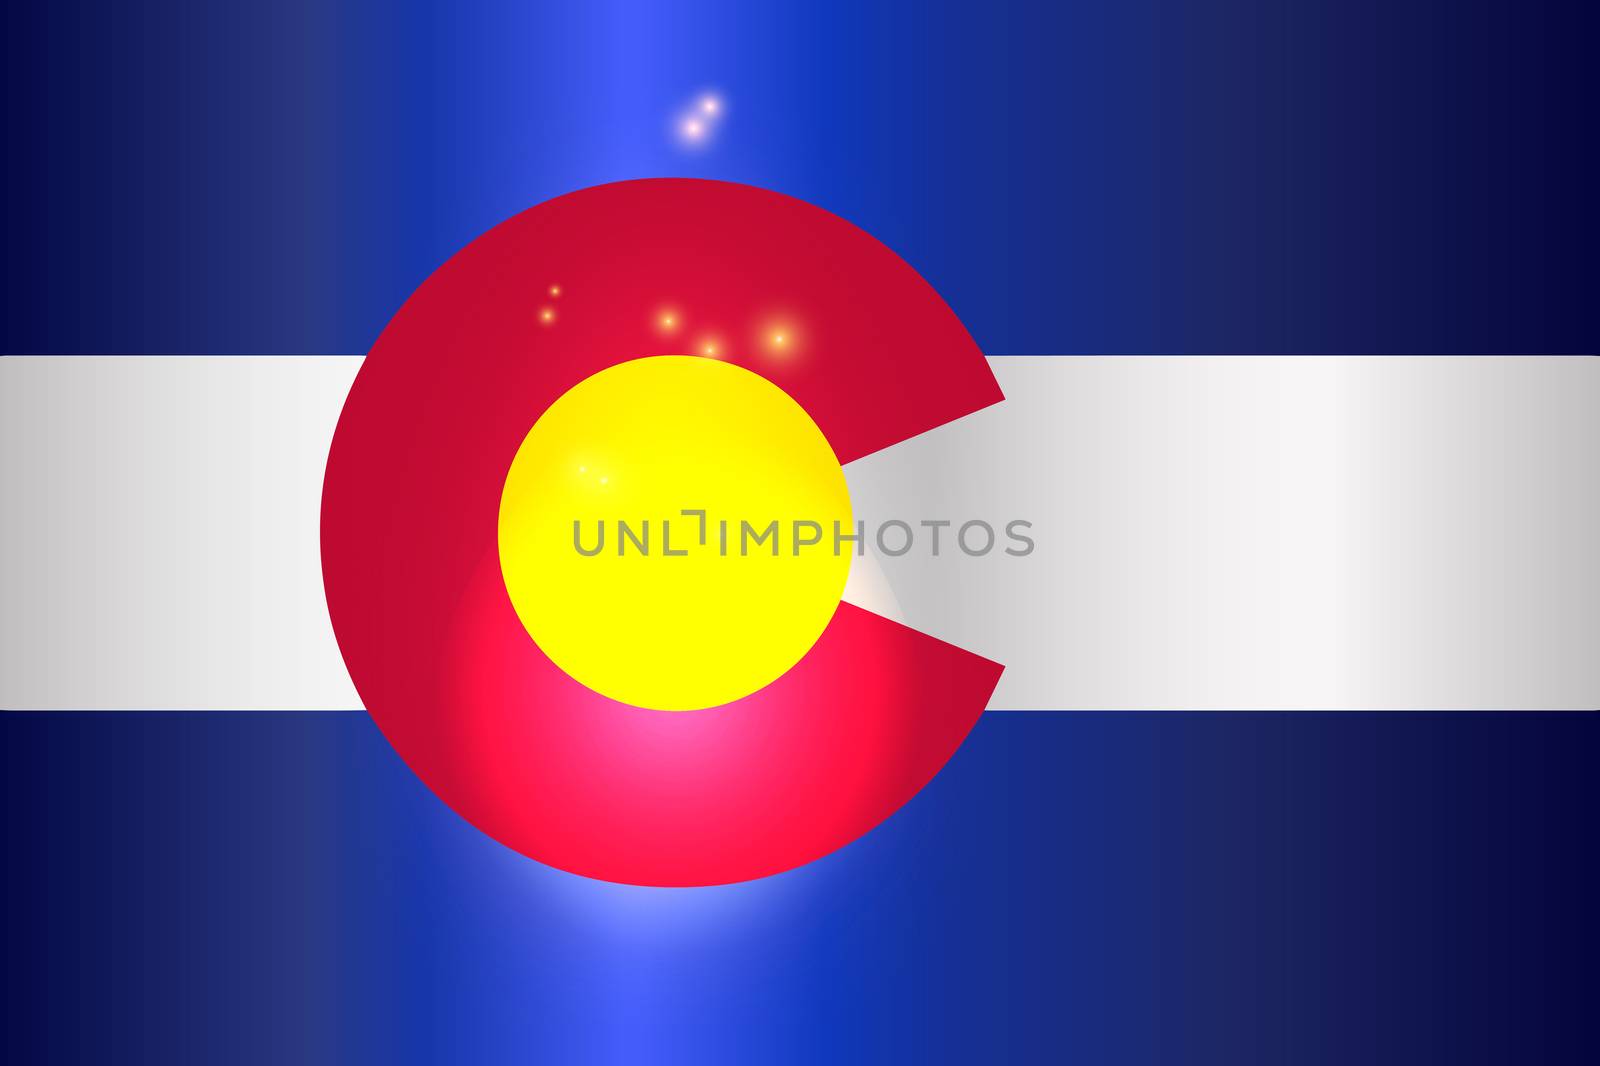 The United States of American state flat of colorado